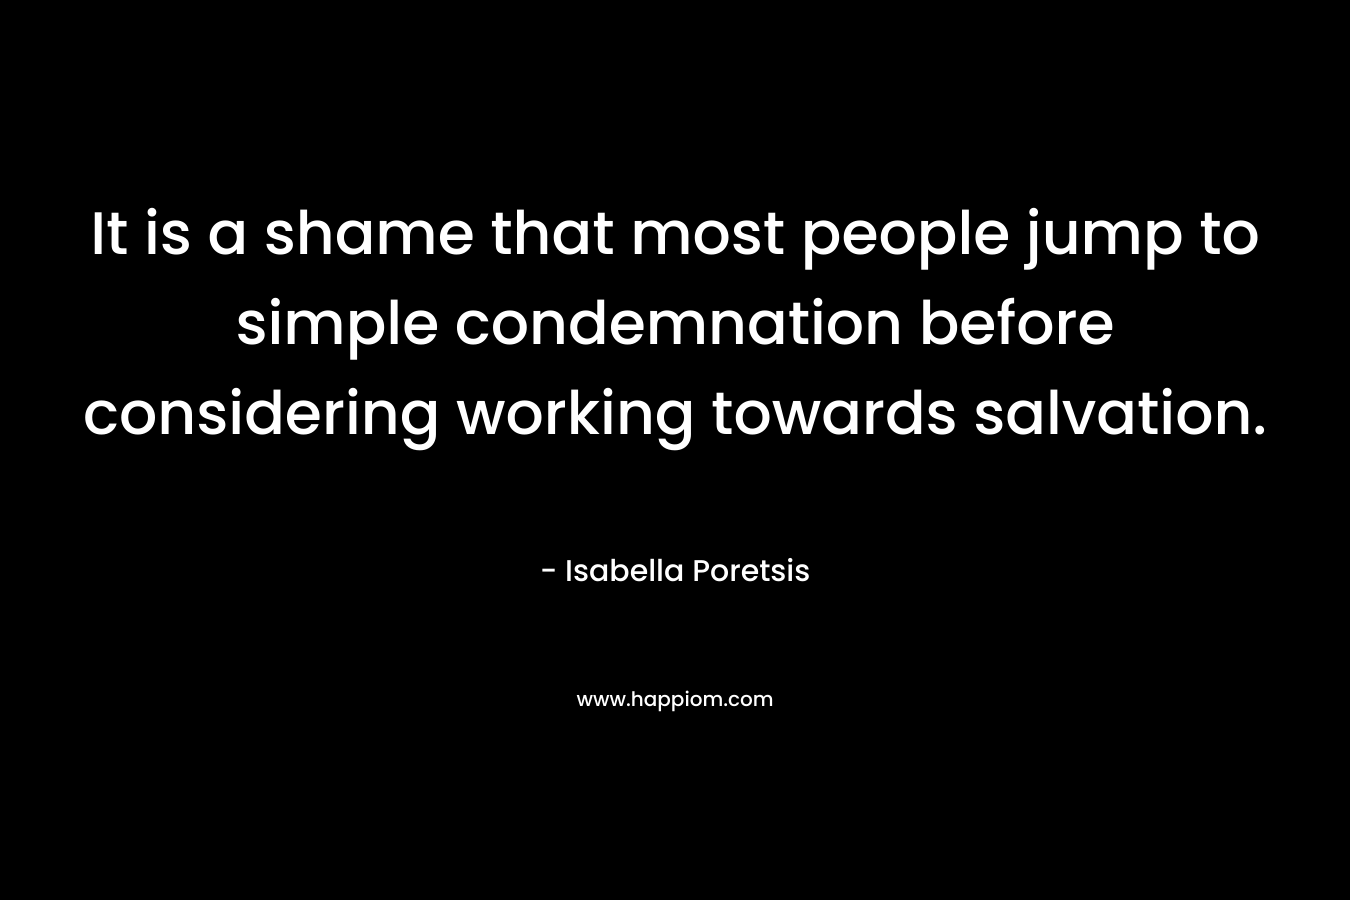 It is a shame that most people jump to simple condemnation before considering working towards salvation.